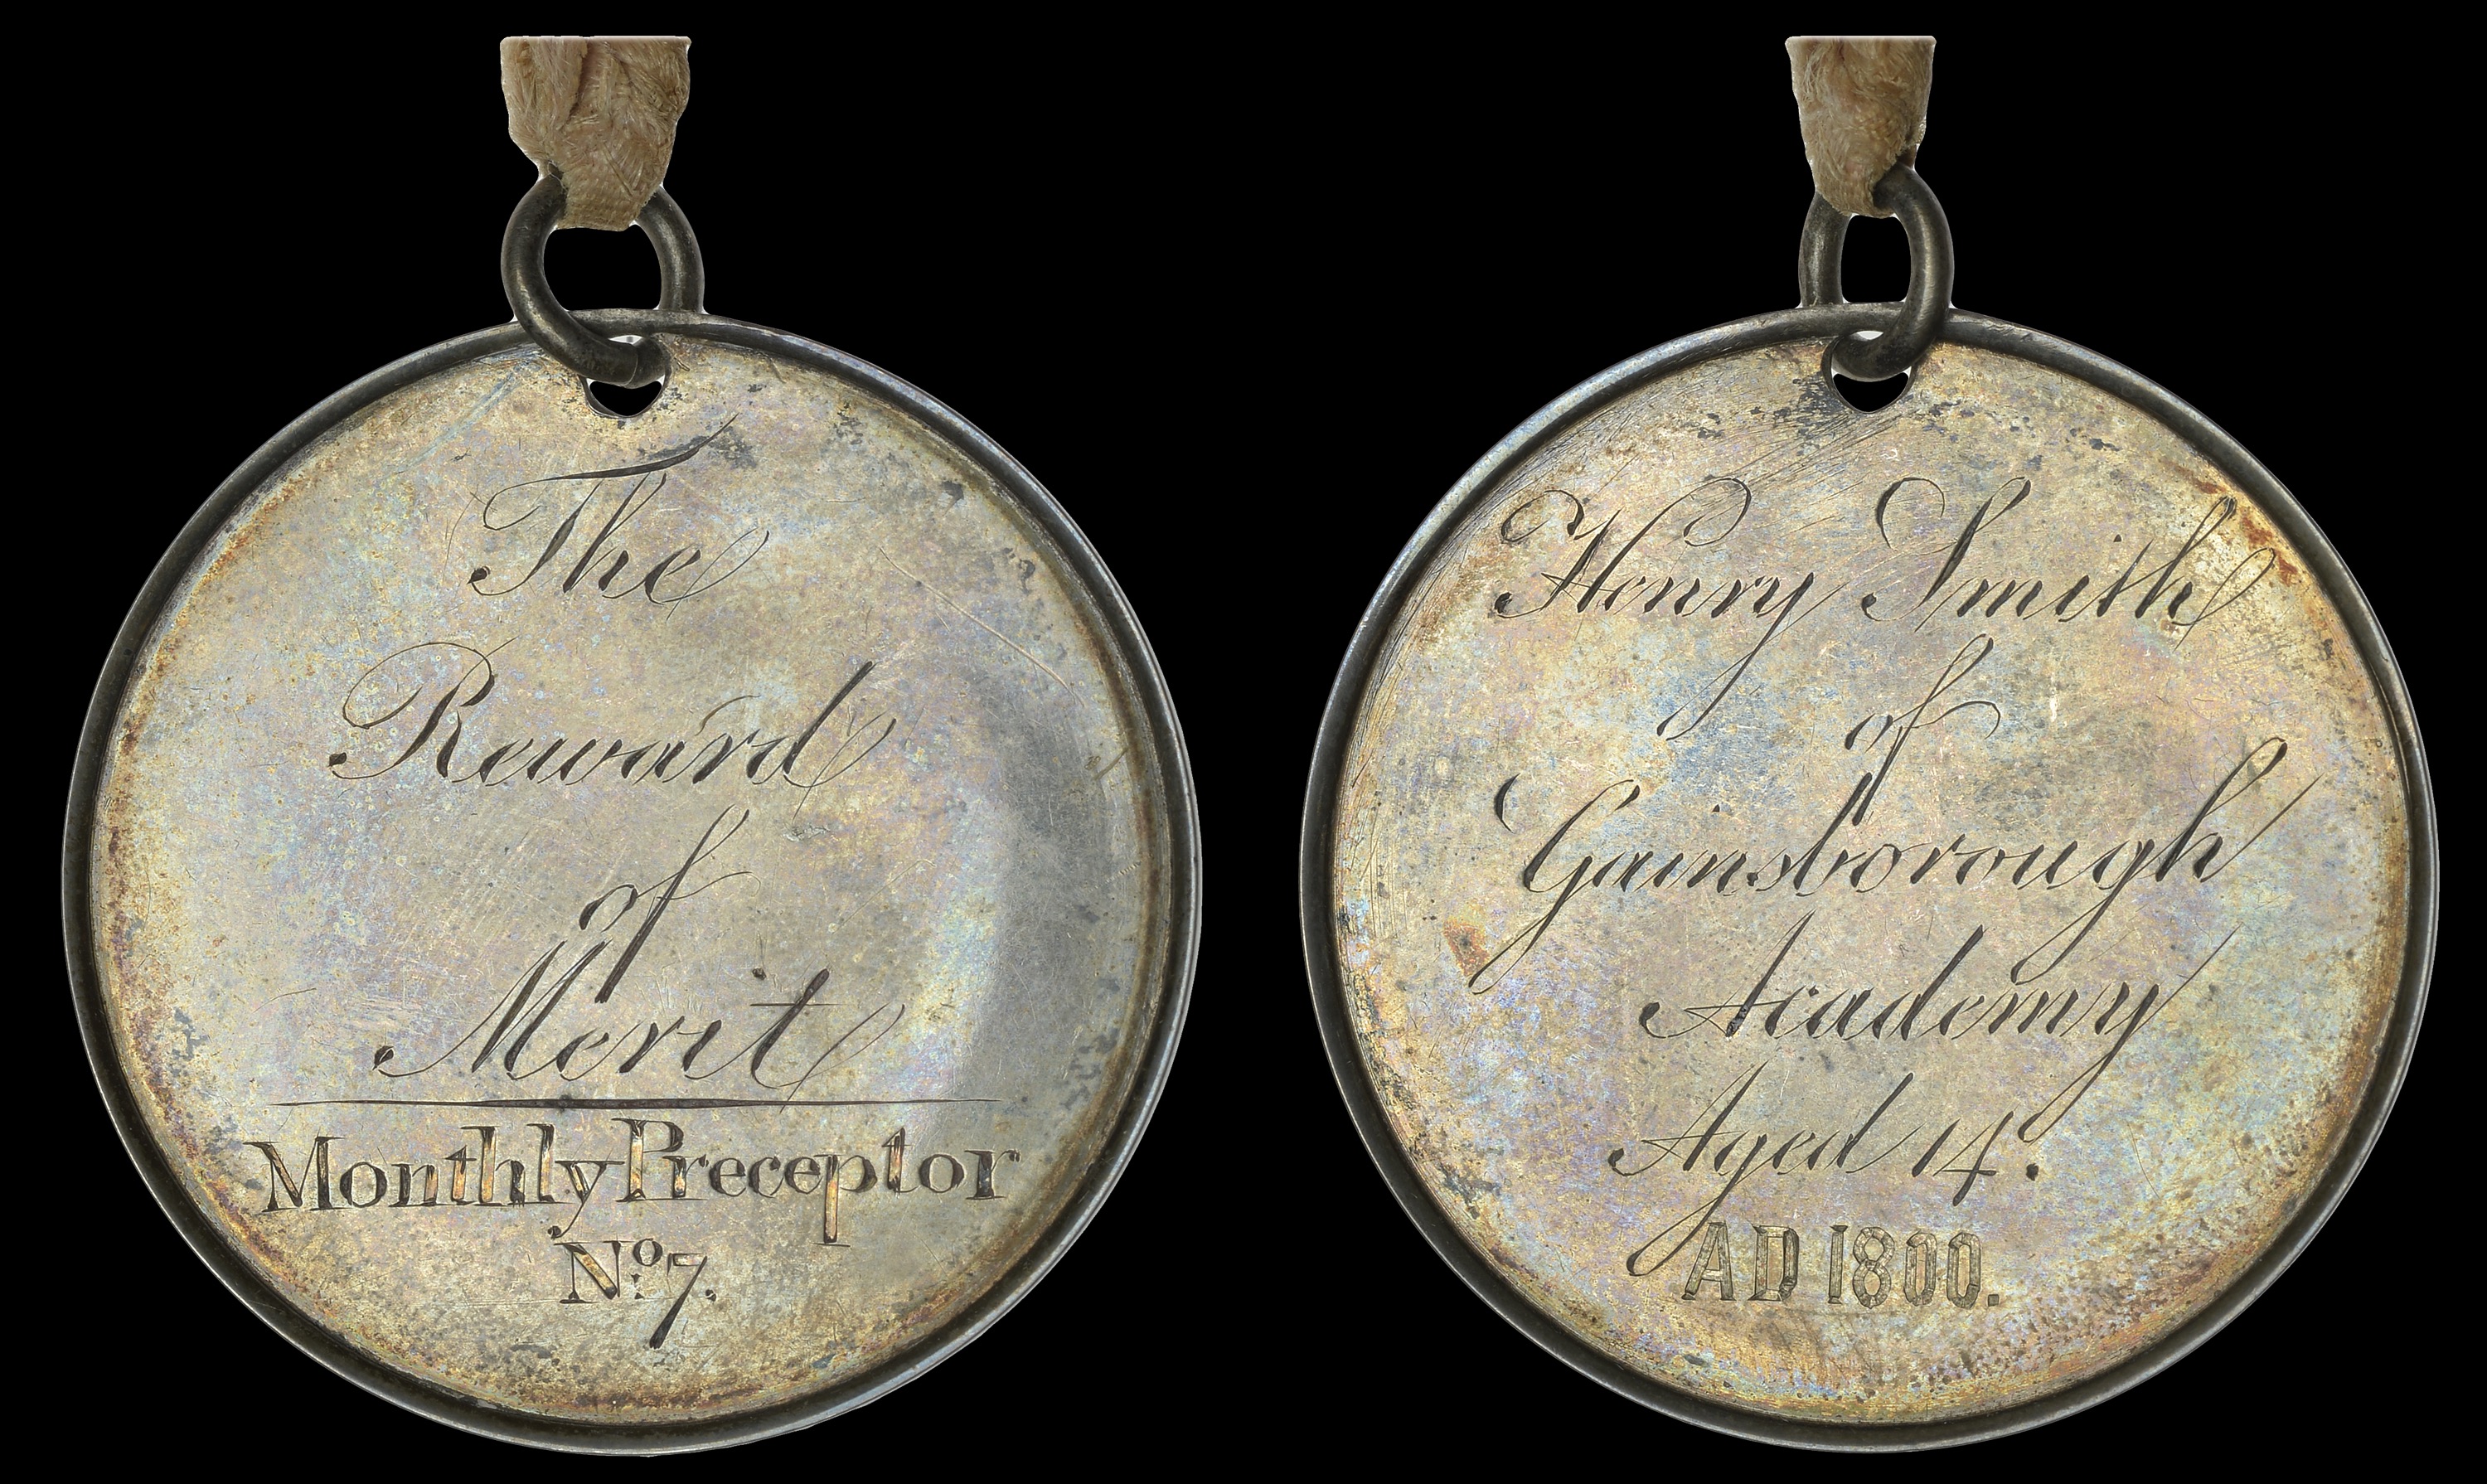 British Educational Award Medals from the Collection Formed by the Late T.h. Watts